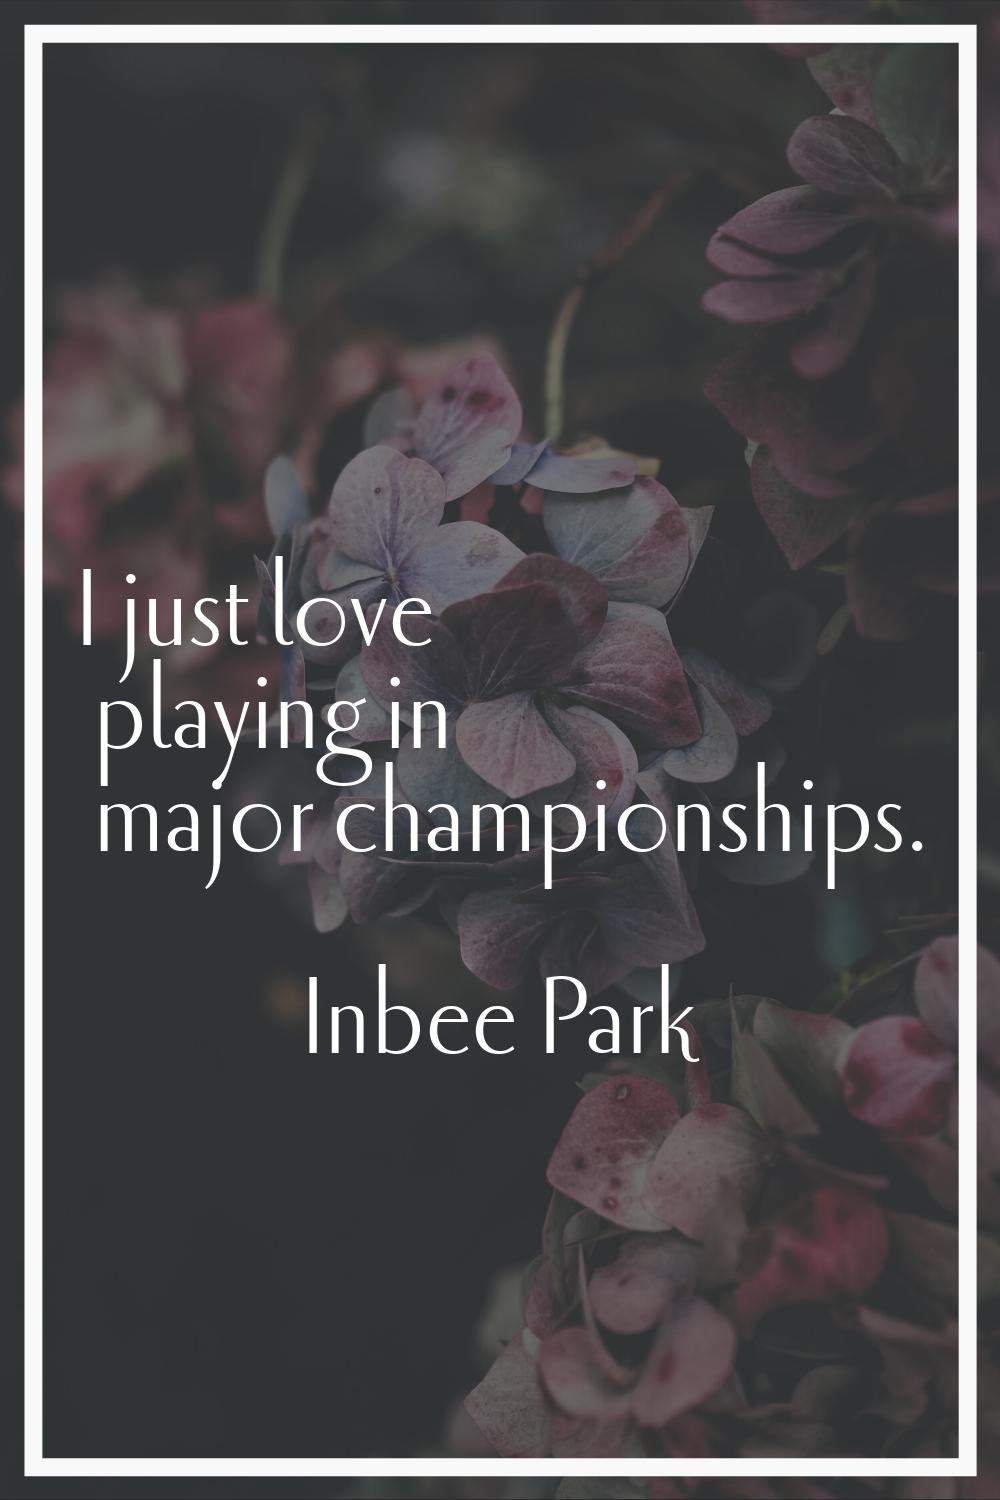 I just love playing in major championships.